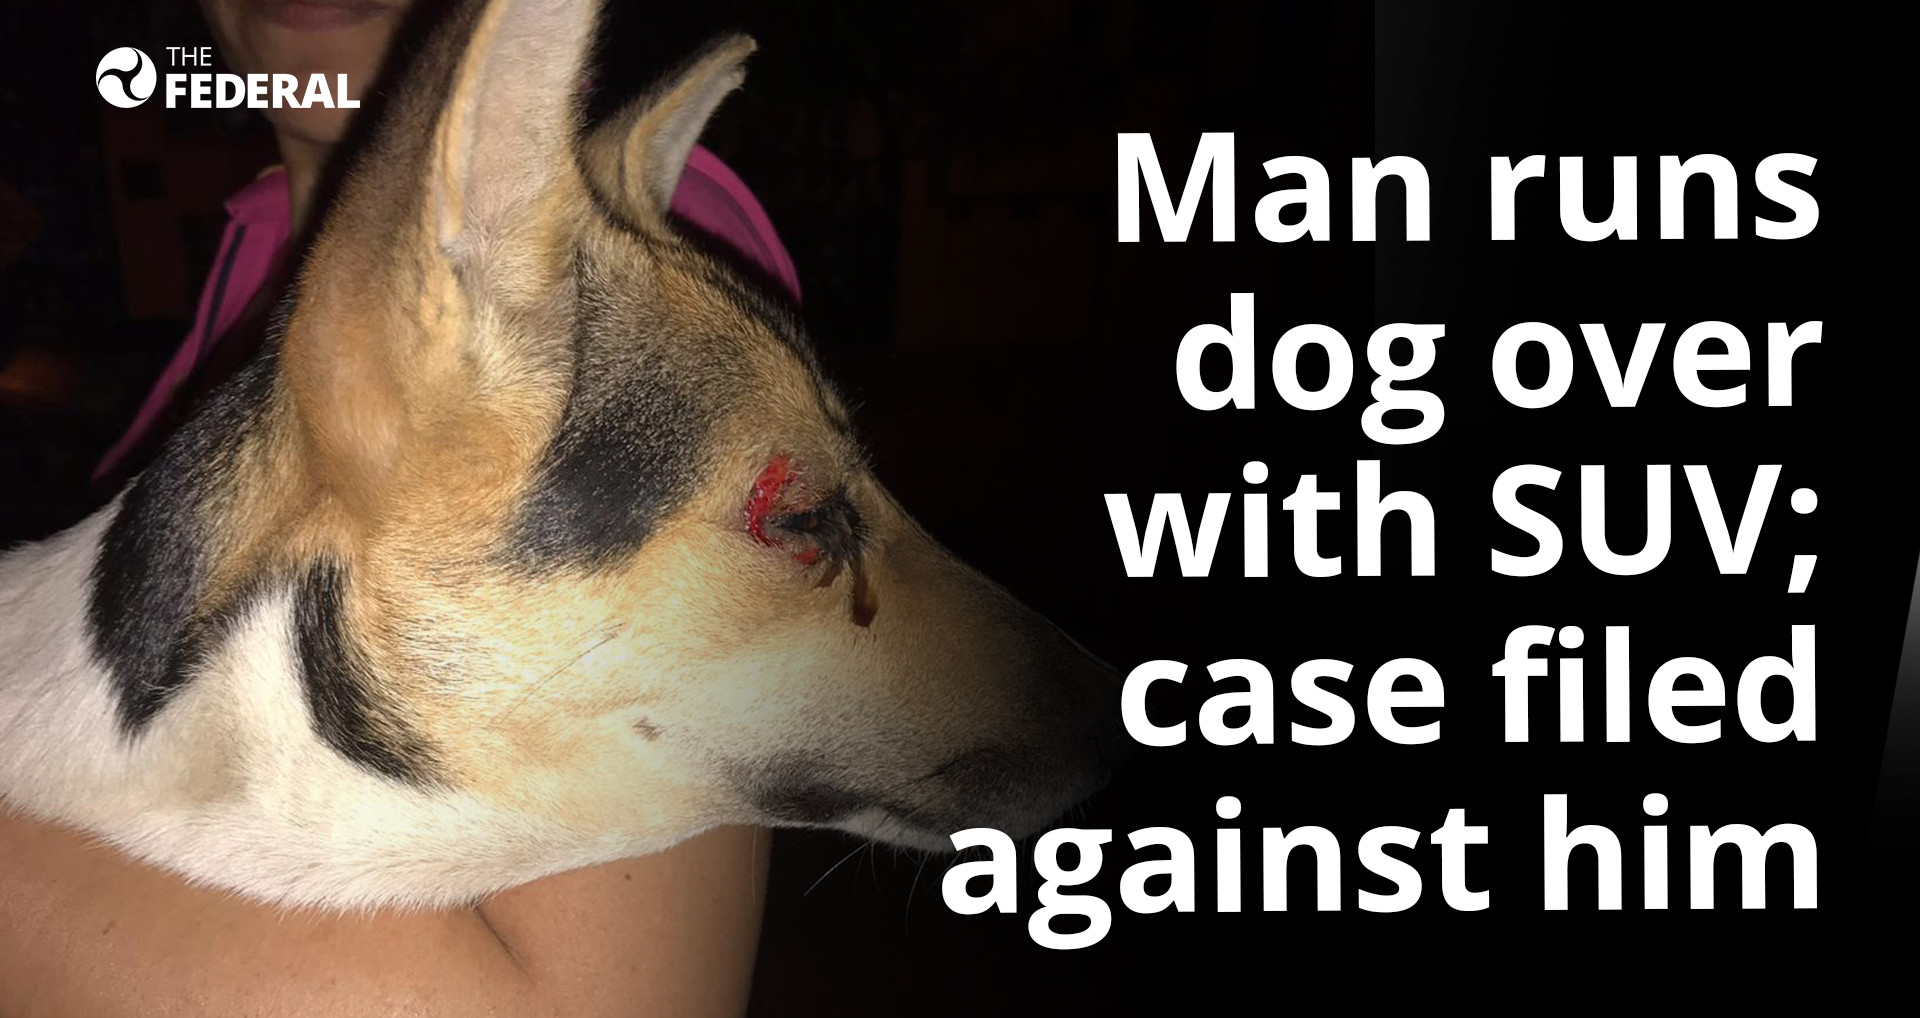 Man runs dog over with SUV; case filed against him